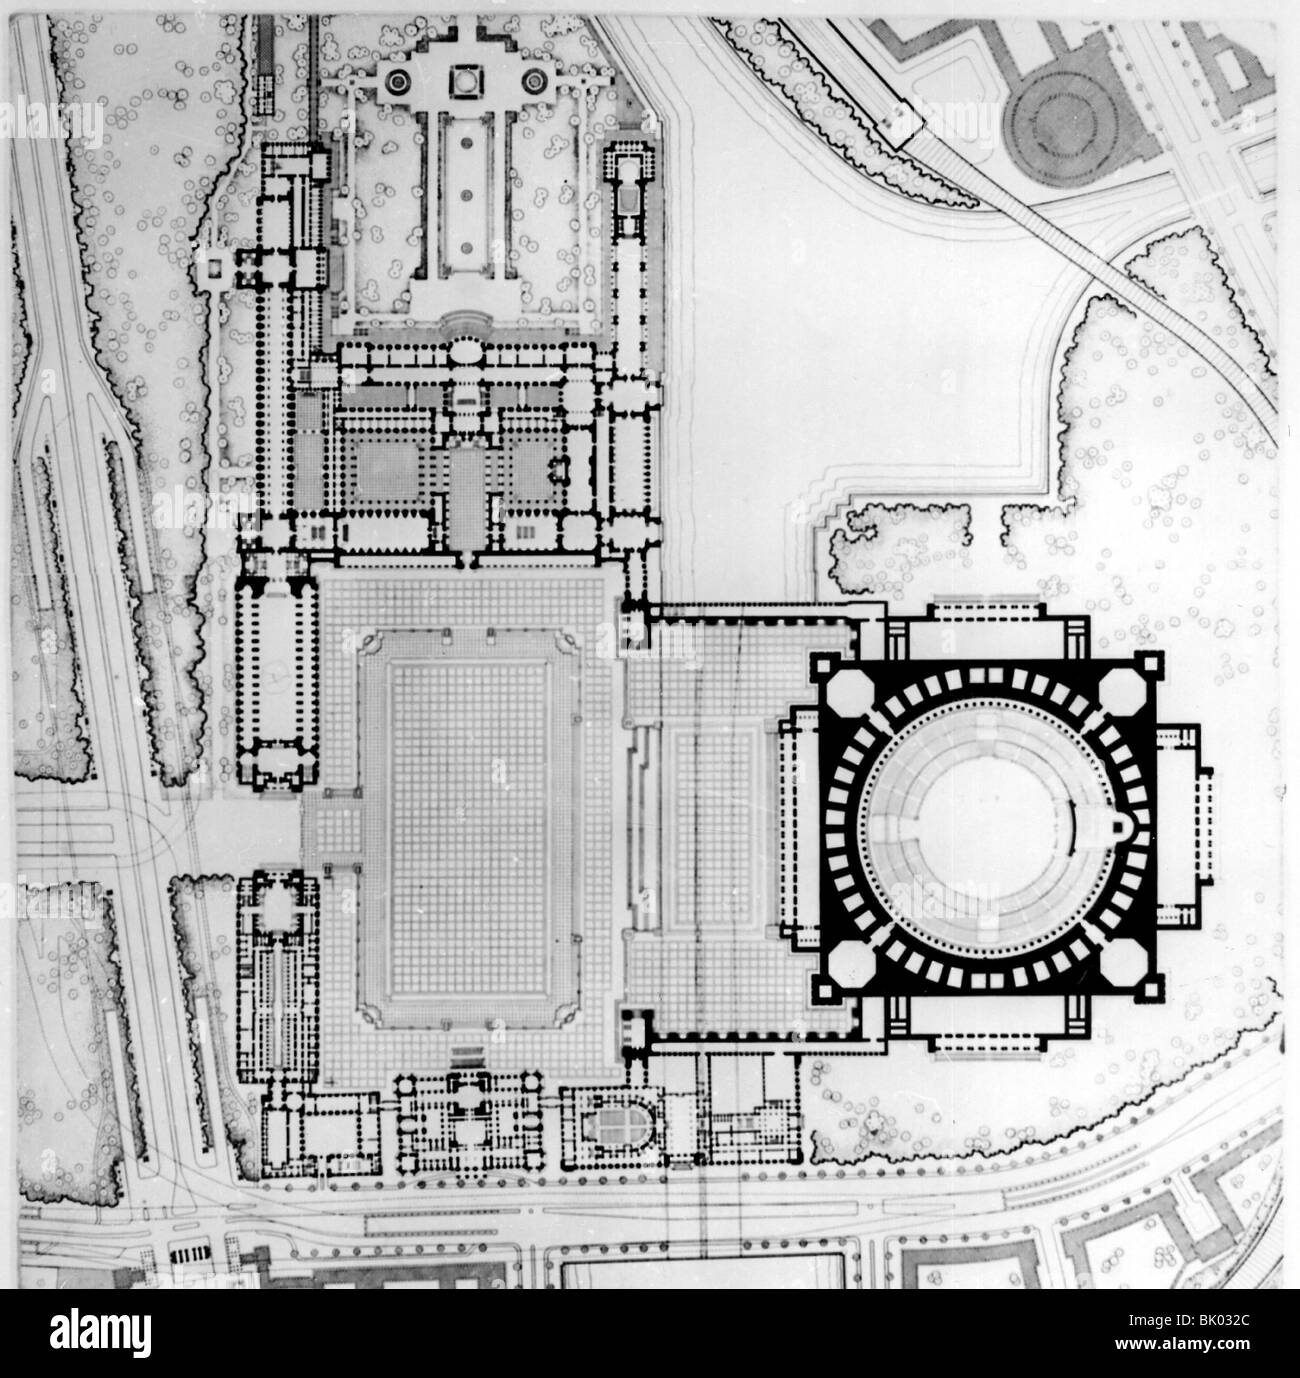 Nazism / National Socialism, architecture, capital of the German Reich 'Germania' (former Berlin), ground plan of 'Great Hall' and 'Fuehrer Palace', draft by Albert Speer, late 1930s, Stock Photo